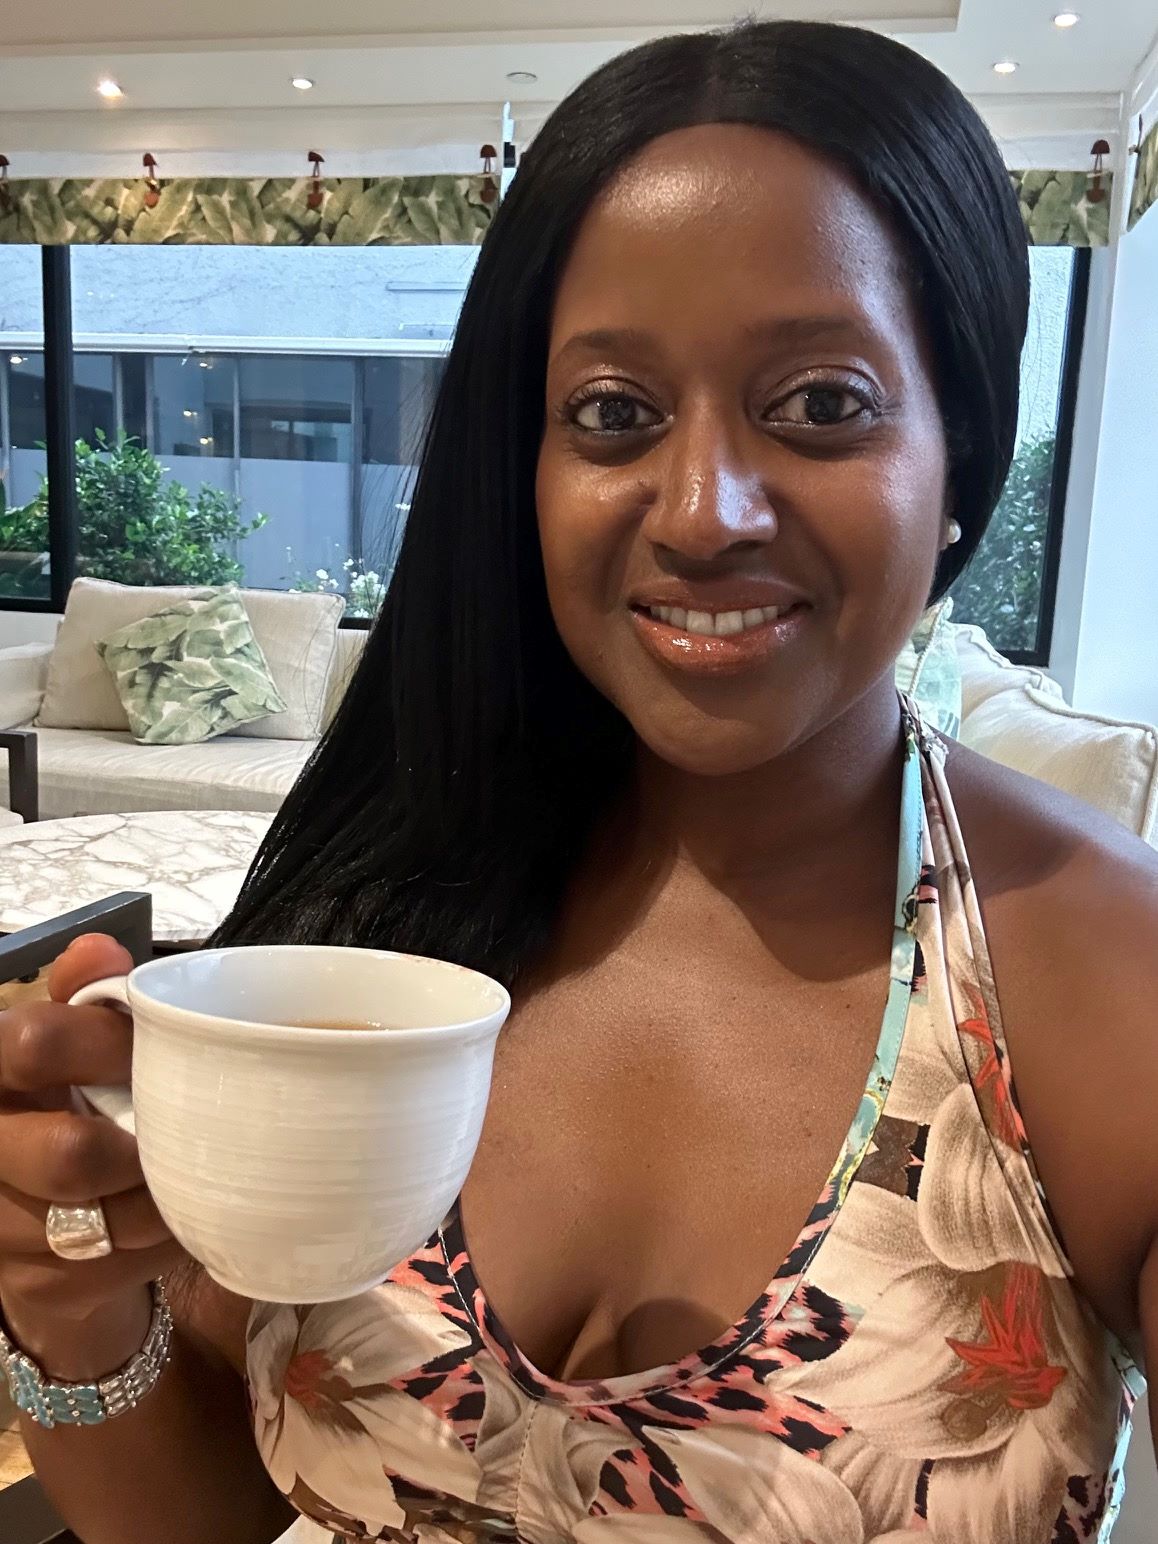 An image of lifestyle blogger Ariel raising a cup of tea.